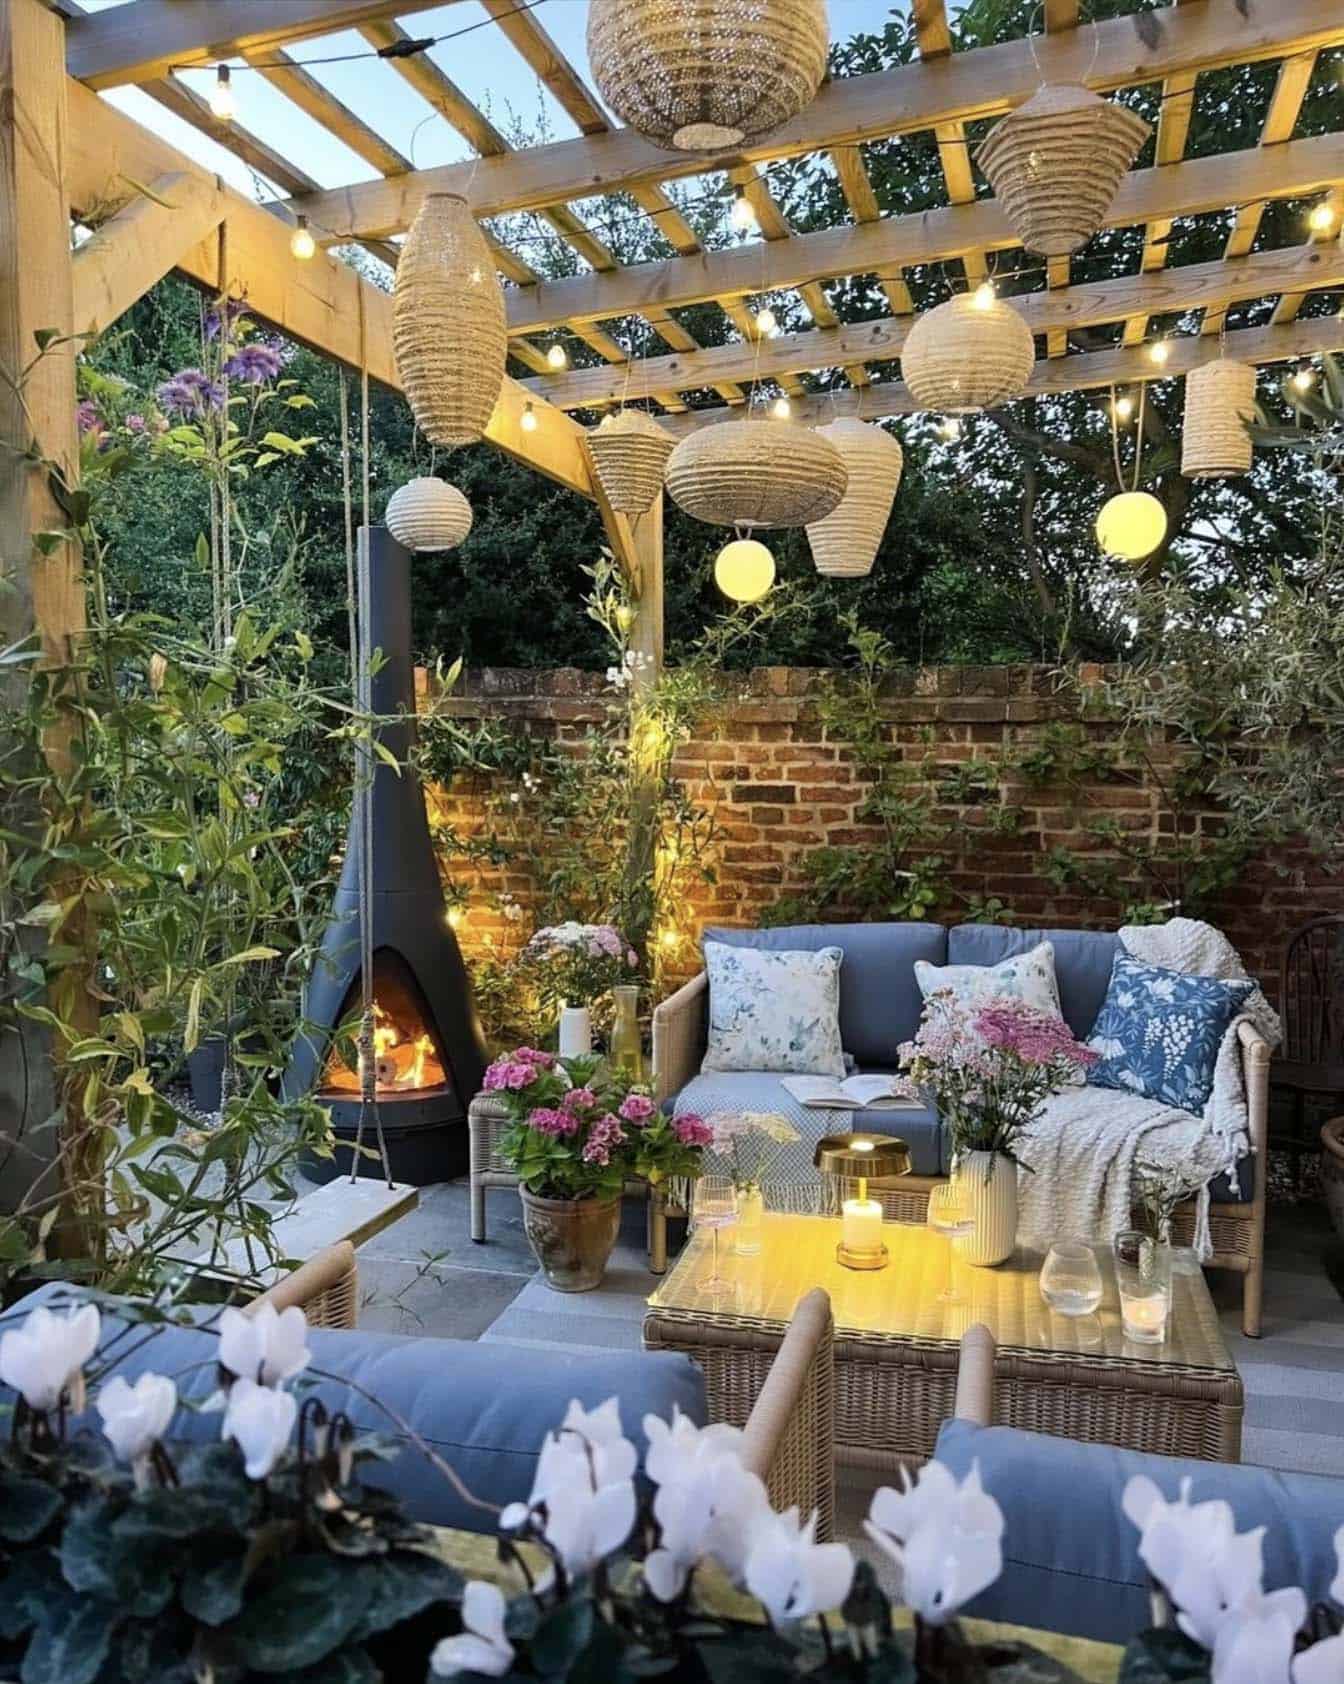 backyard patio with a trellis, outdoor furniture, and fireplace stove